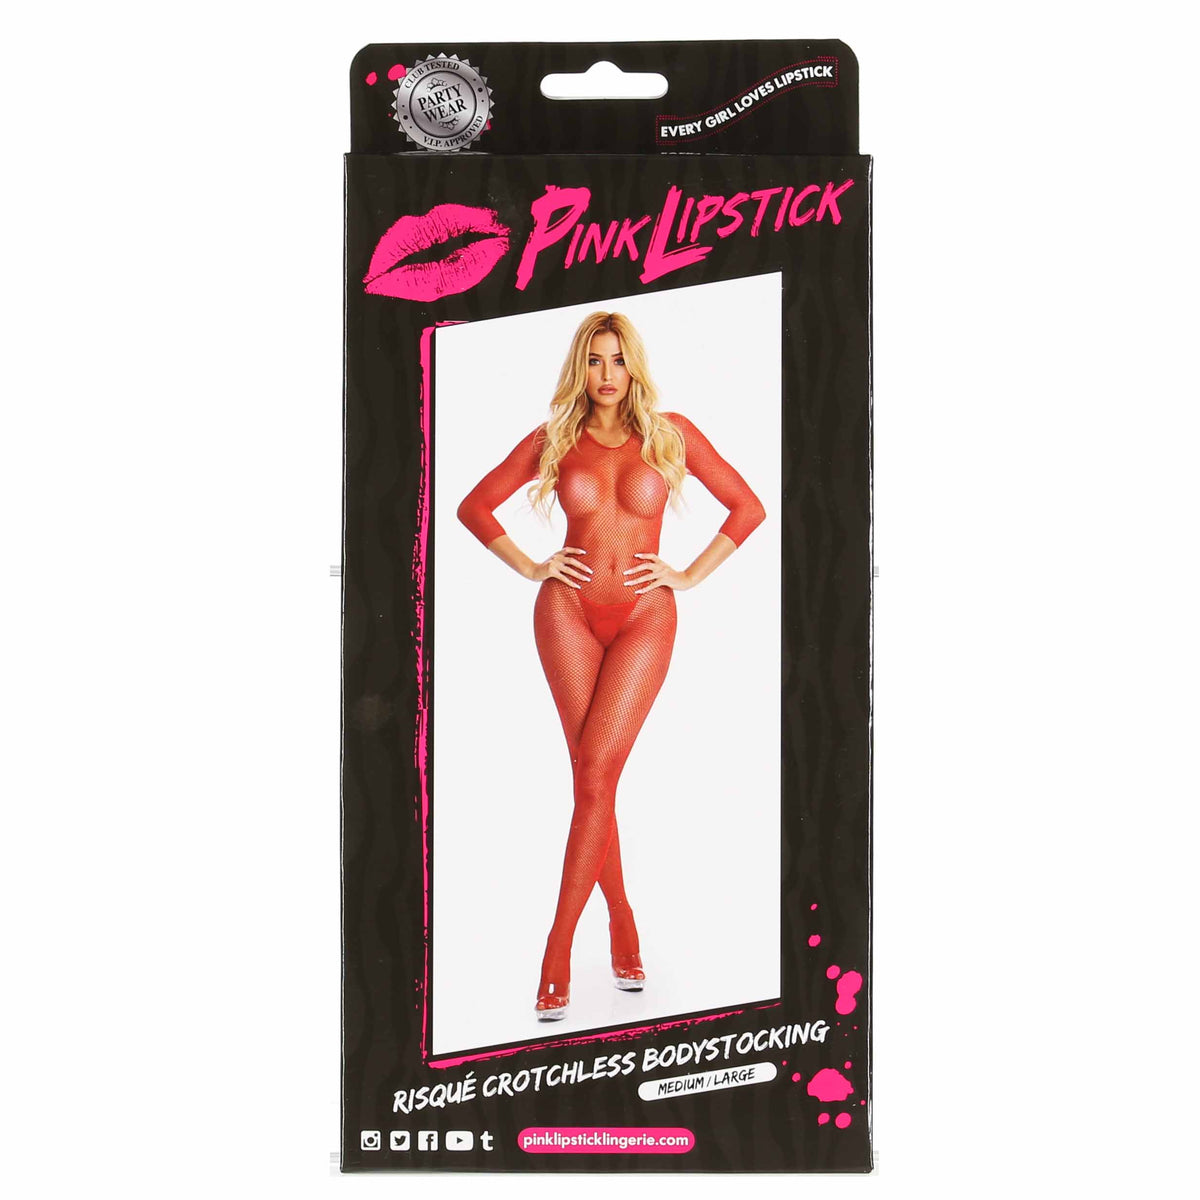 Pink Lipstick - Risque Crotchless Bodystocking - Red - M/L